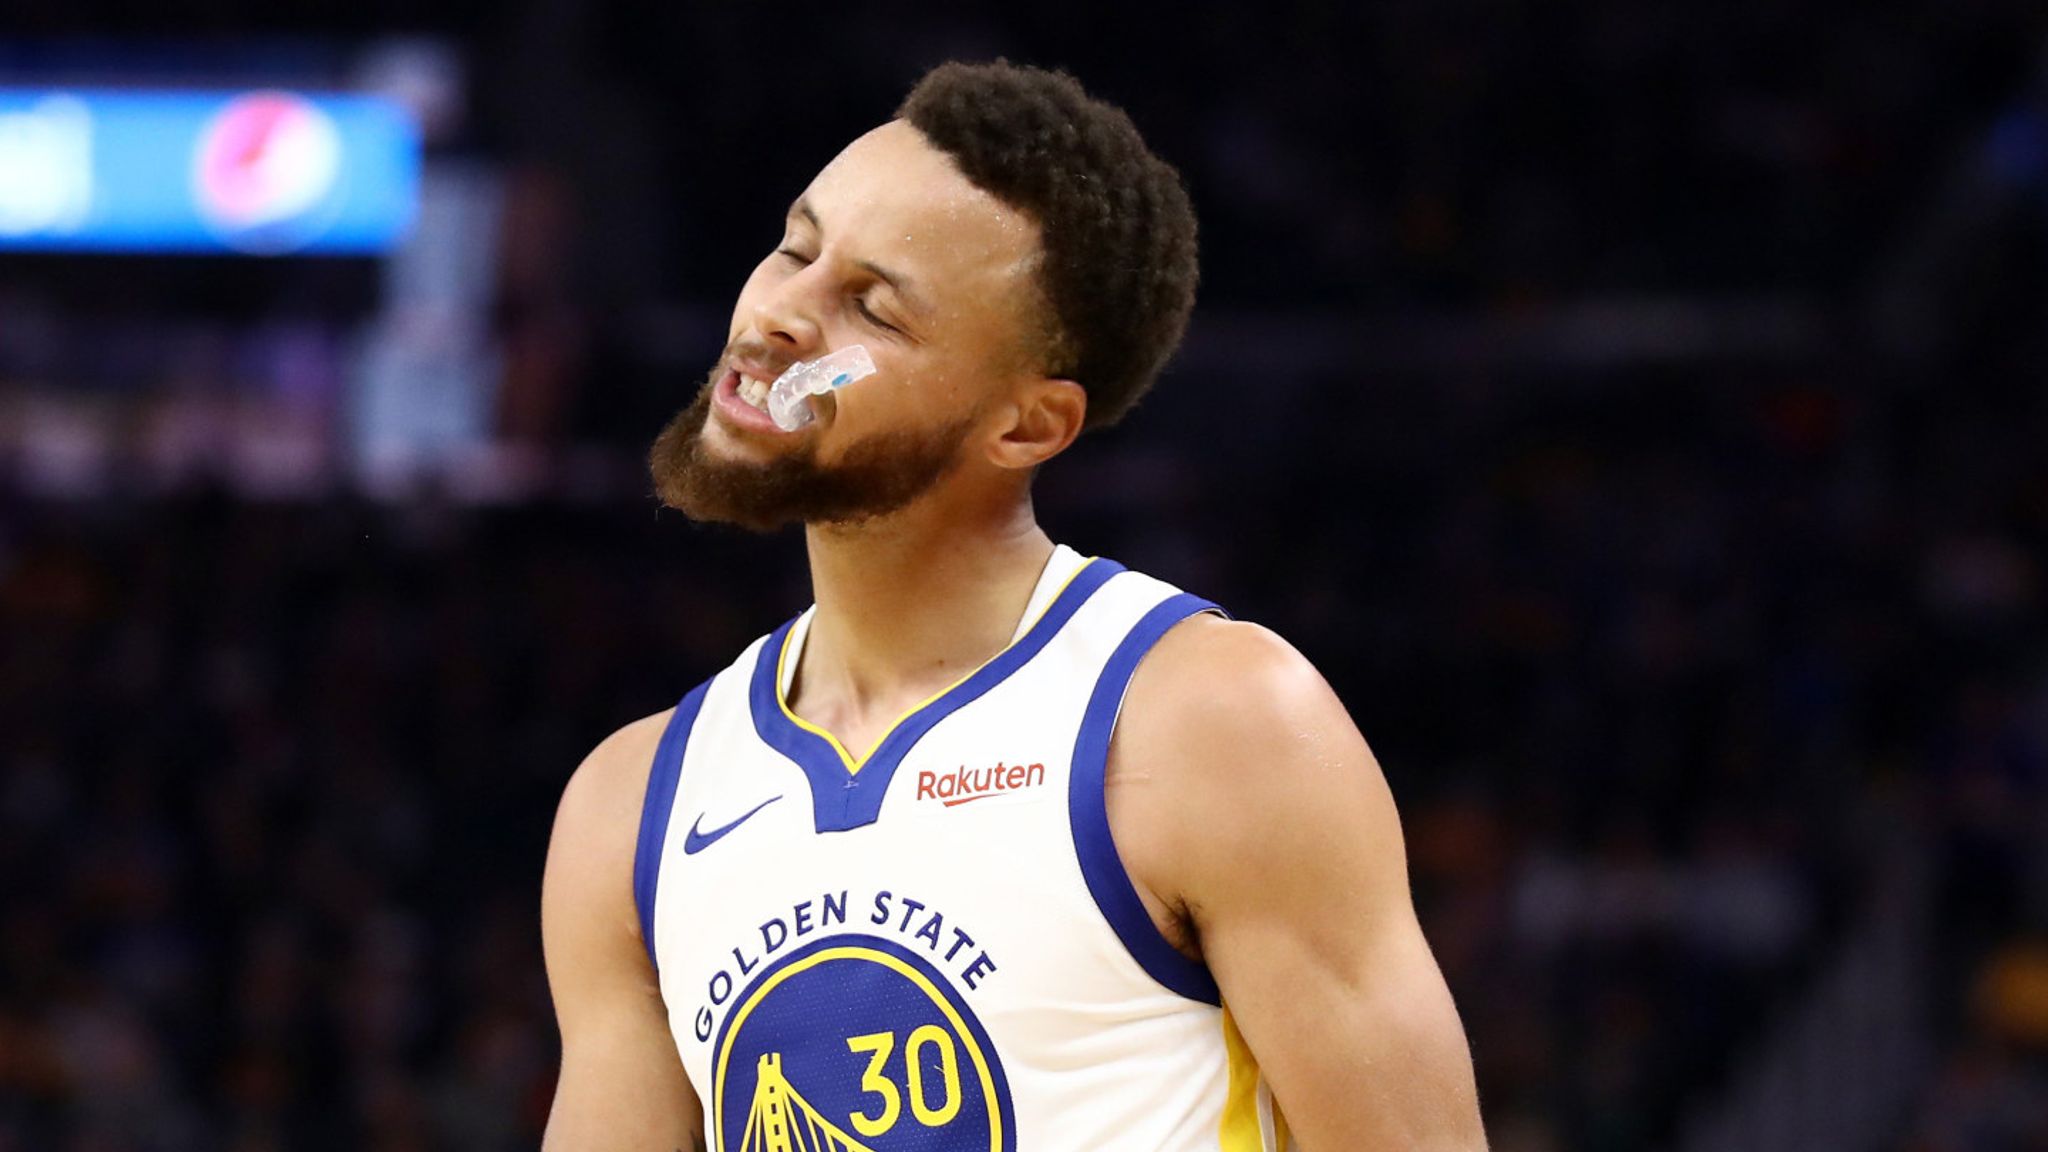 Steph Curry explodes for 50 points but Golden State Warriors still beaten  130-119 by Phoenix Suns